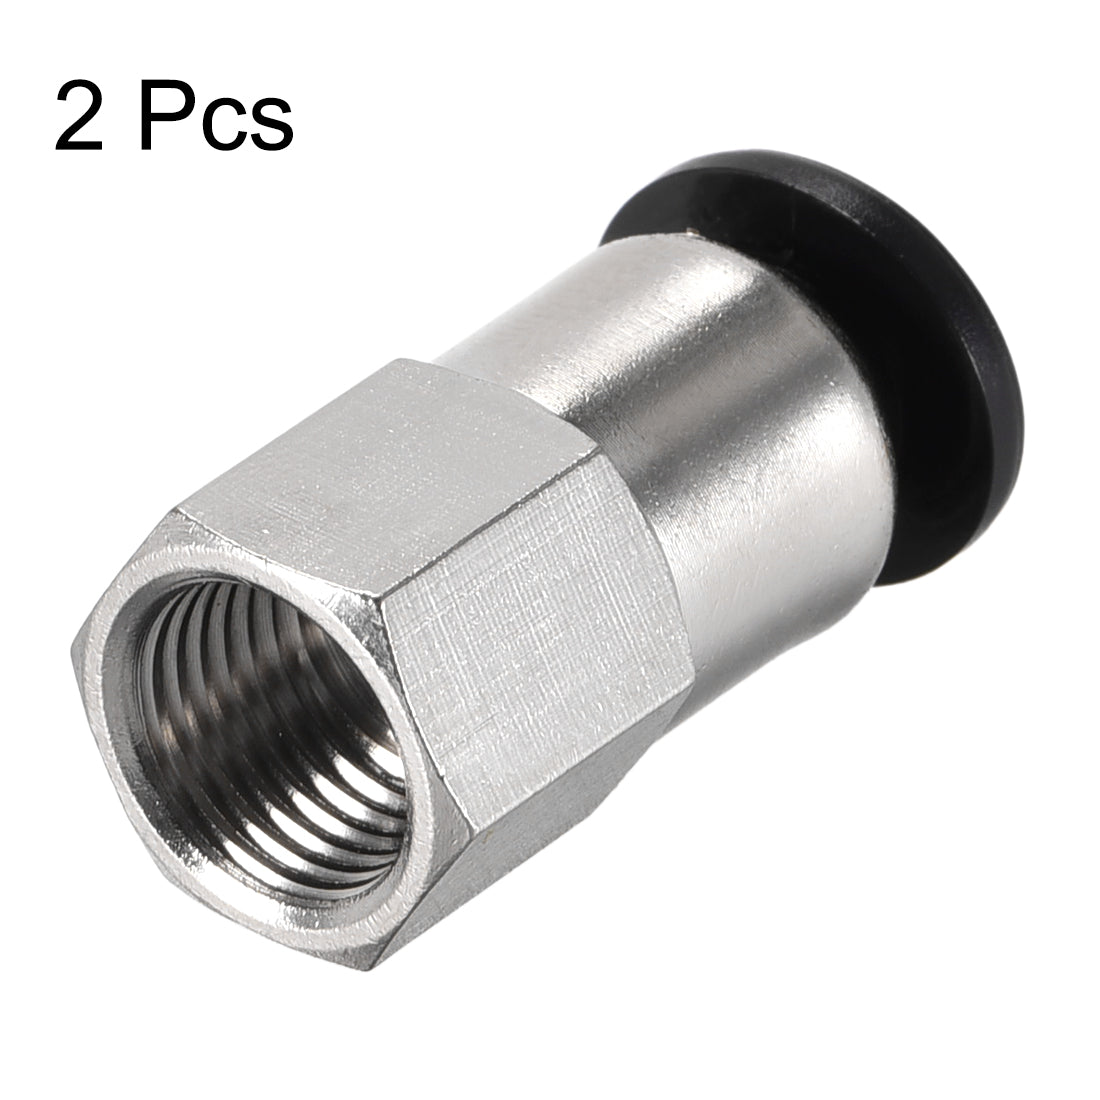 uxcell Uxcell Push to Connect Tube Fitting Adapter 6mm Tube OD x 1/8 PT Female Straight Pneumatic Connecter Pipe Fitting 2pcs